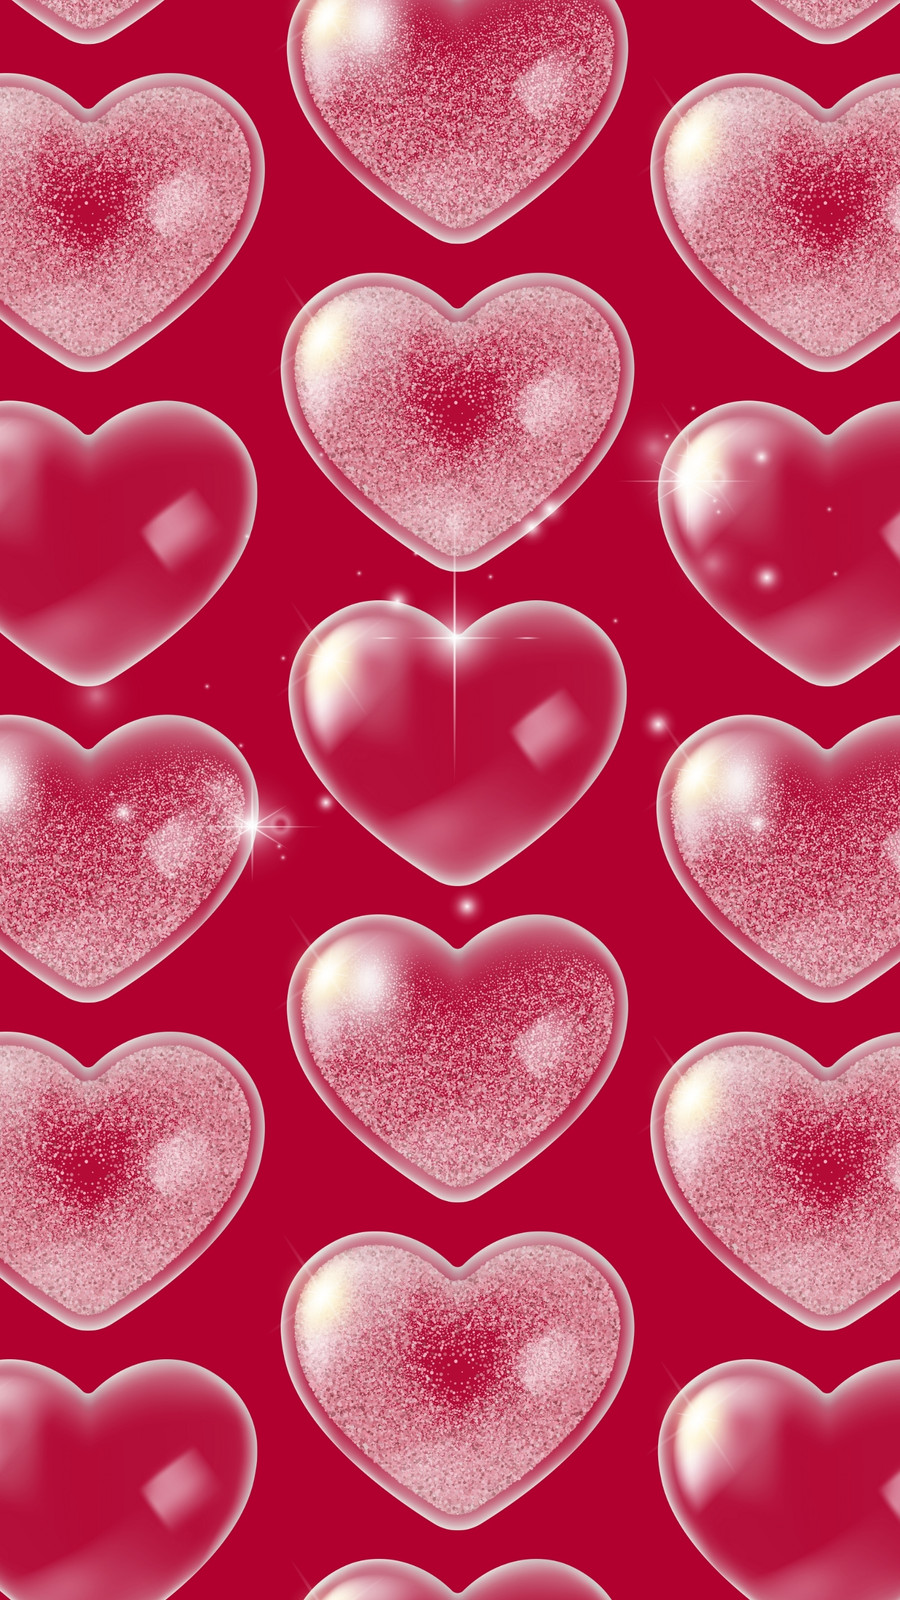 Valentine's Day iPhone wallpaper candy hearts  Valentines wallpaper  iphone, Iphone wallpaper candy, Pink valentine wallpaper